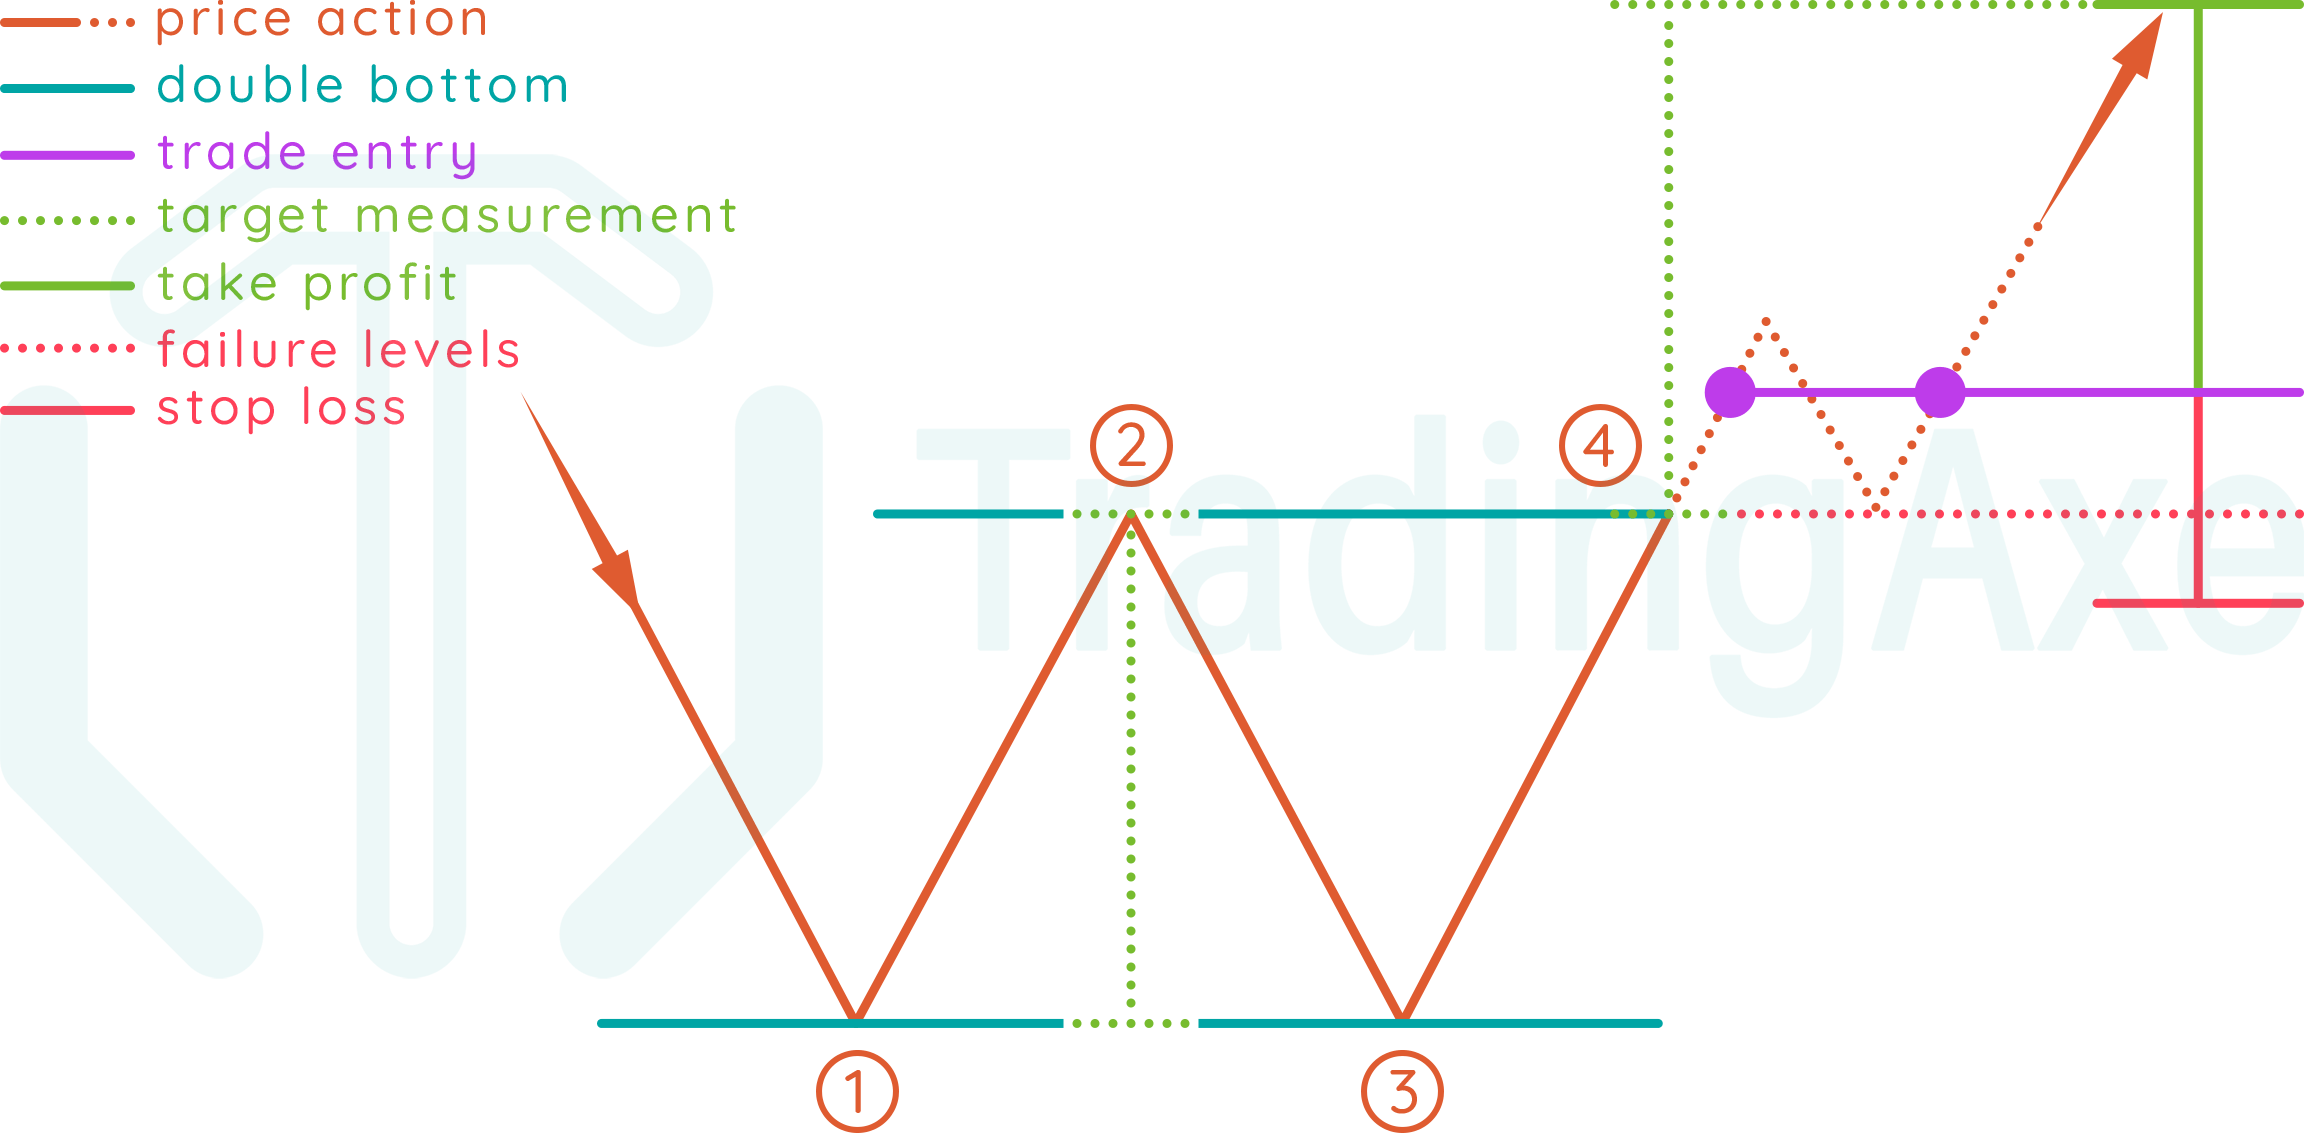 How to trade double bottom chart pattern